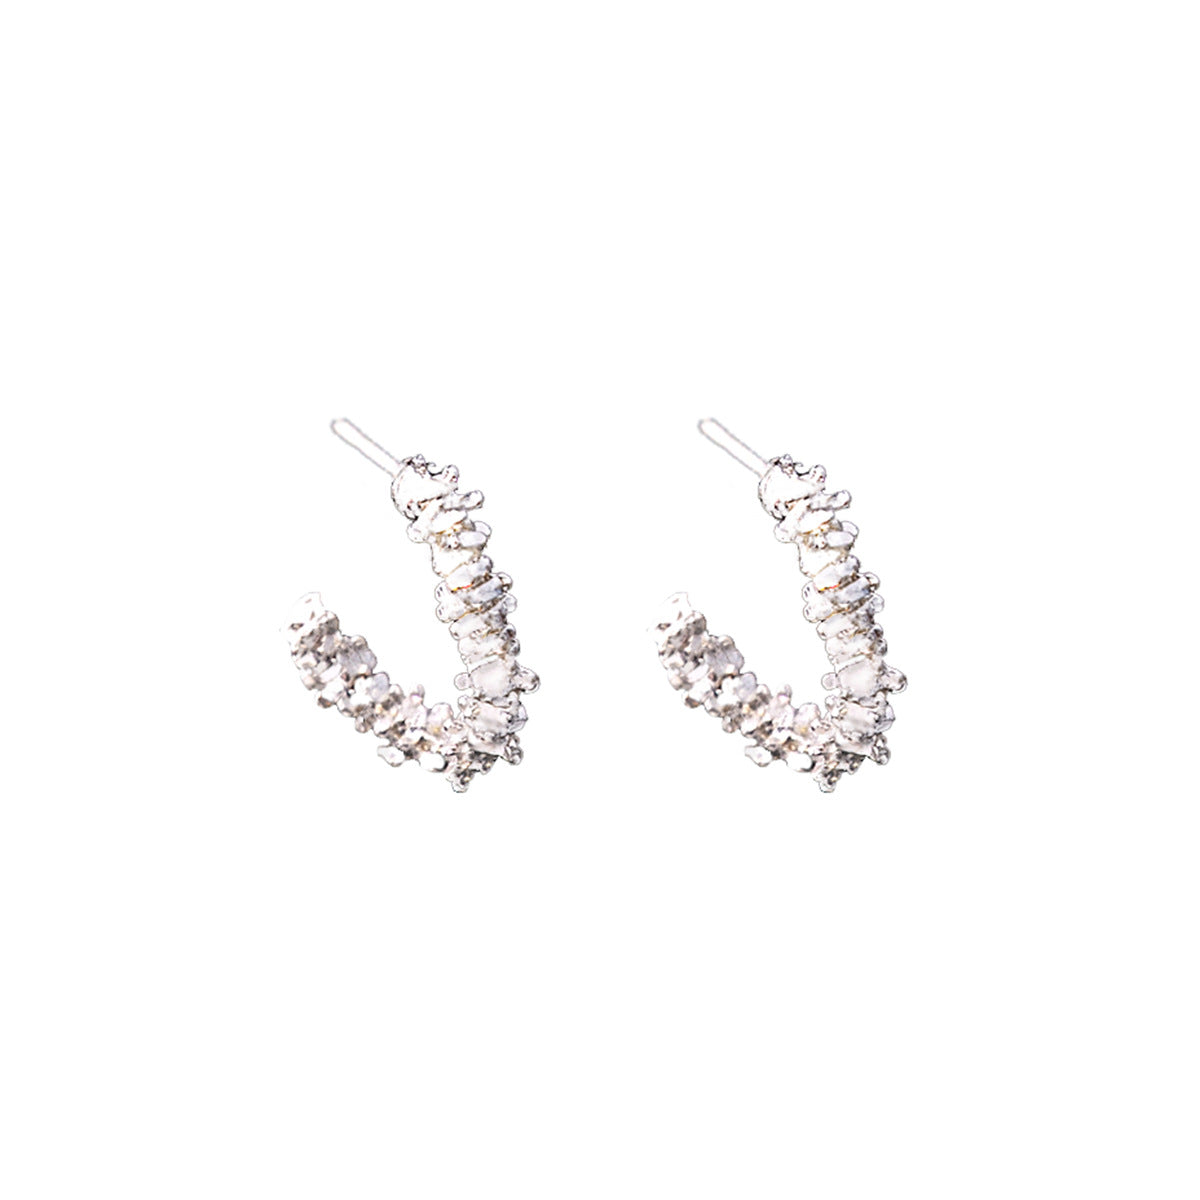 Luxury And Simplicity Shaped Cold Style Earrings